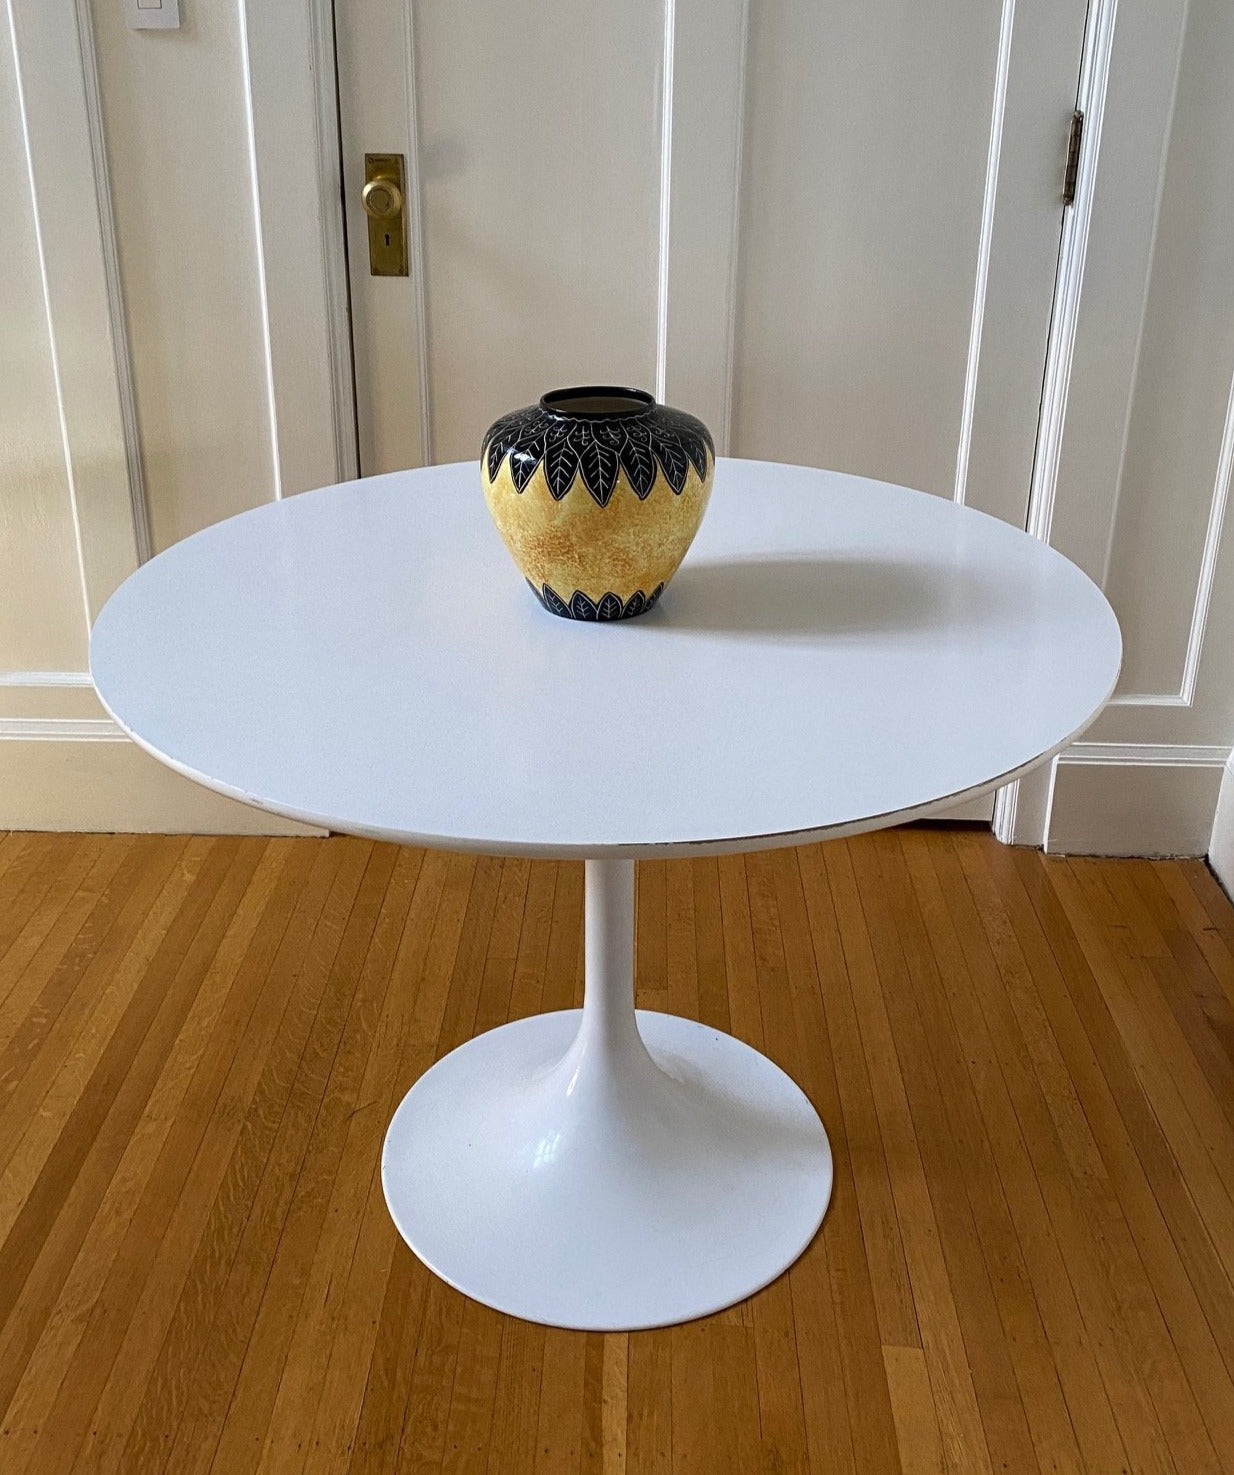 Vintage Tulip Style table. White coated laminate circular top with a finished steel pedestal stem. 